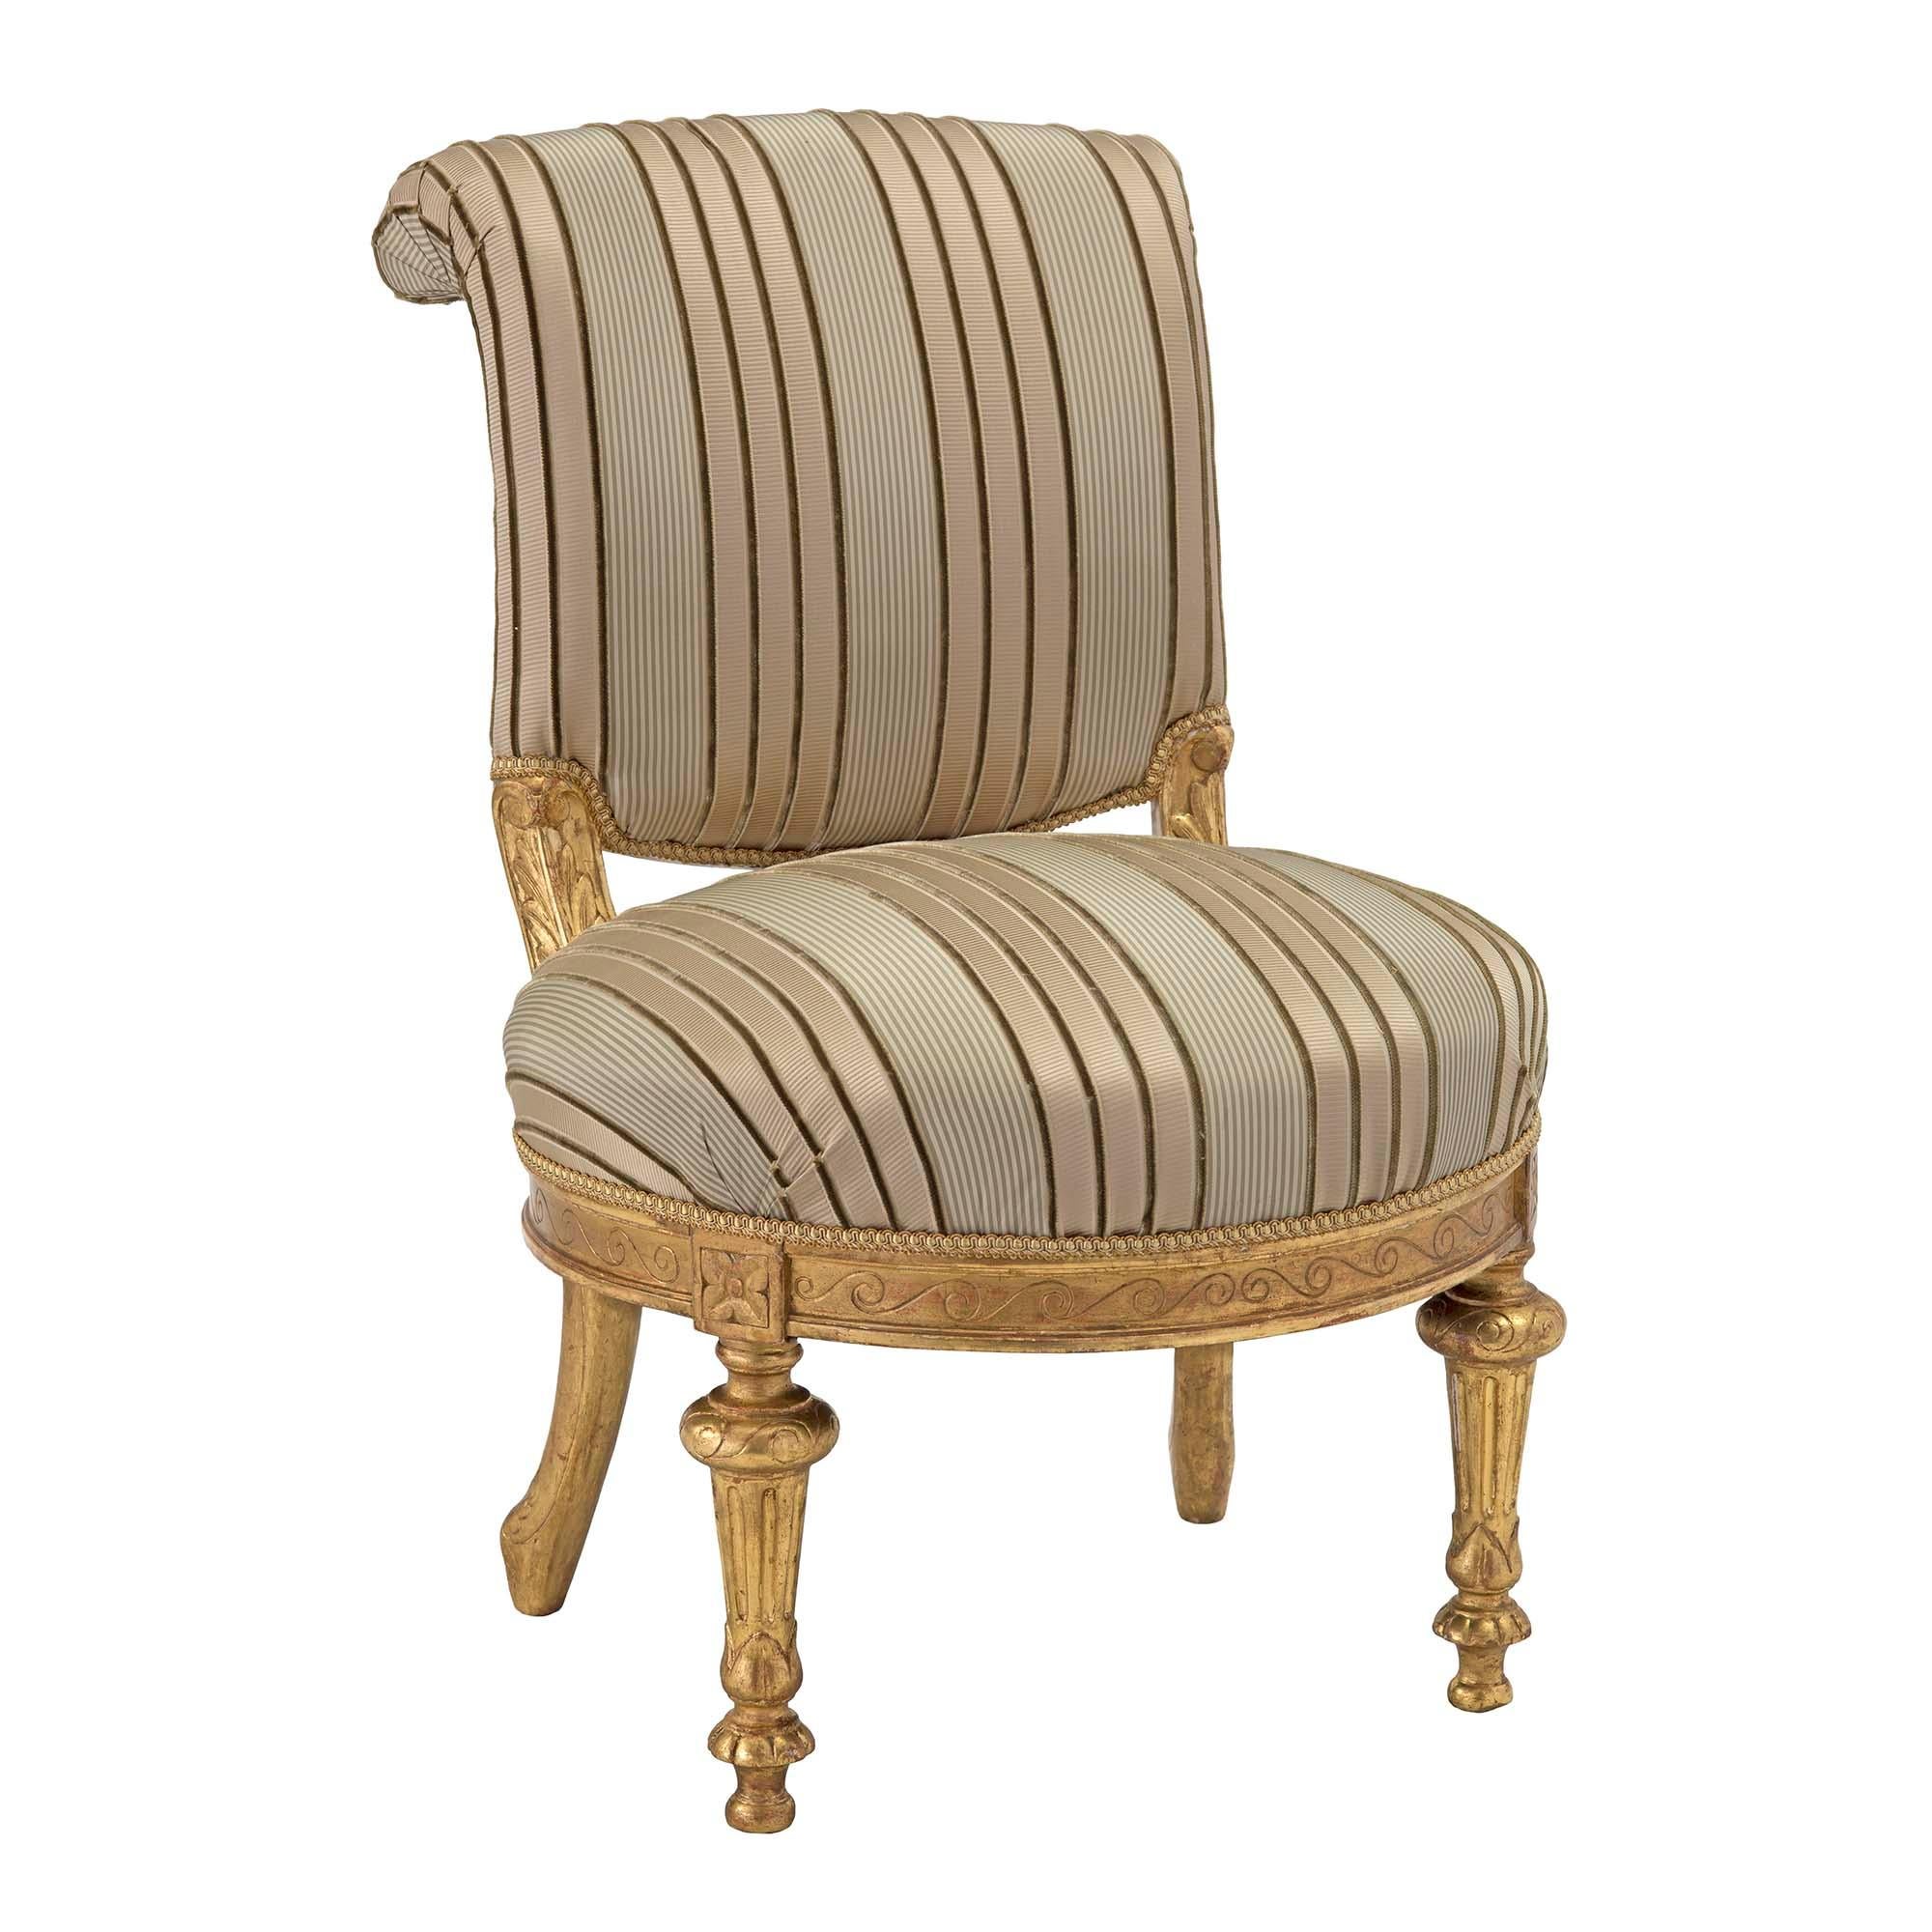 A charming Italian early 19th century Louis XVI st. giltwood slipper chair. The chair is raised by two topie shaped feet below circular fluted legs with finely carved top caps at the front and elegant lightly curved legs to the rear. Above each legs